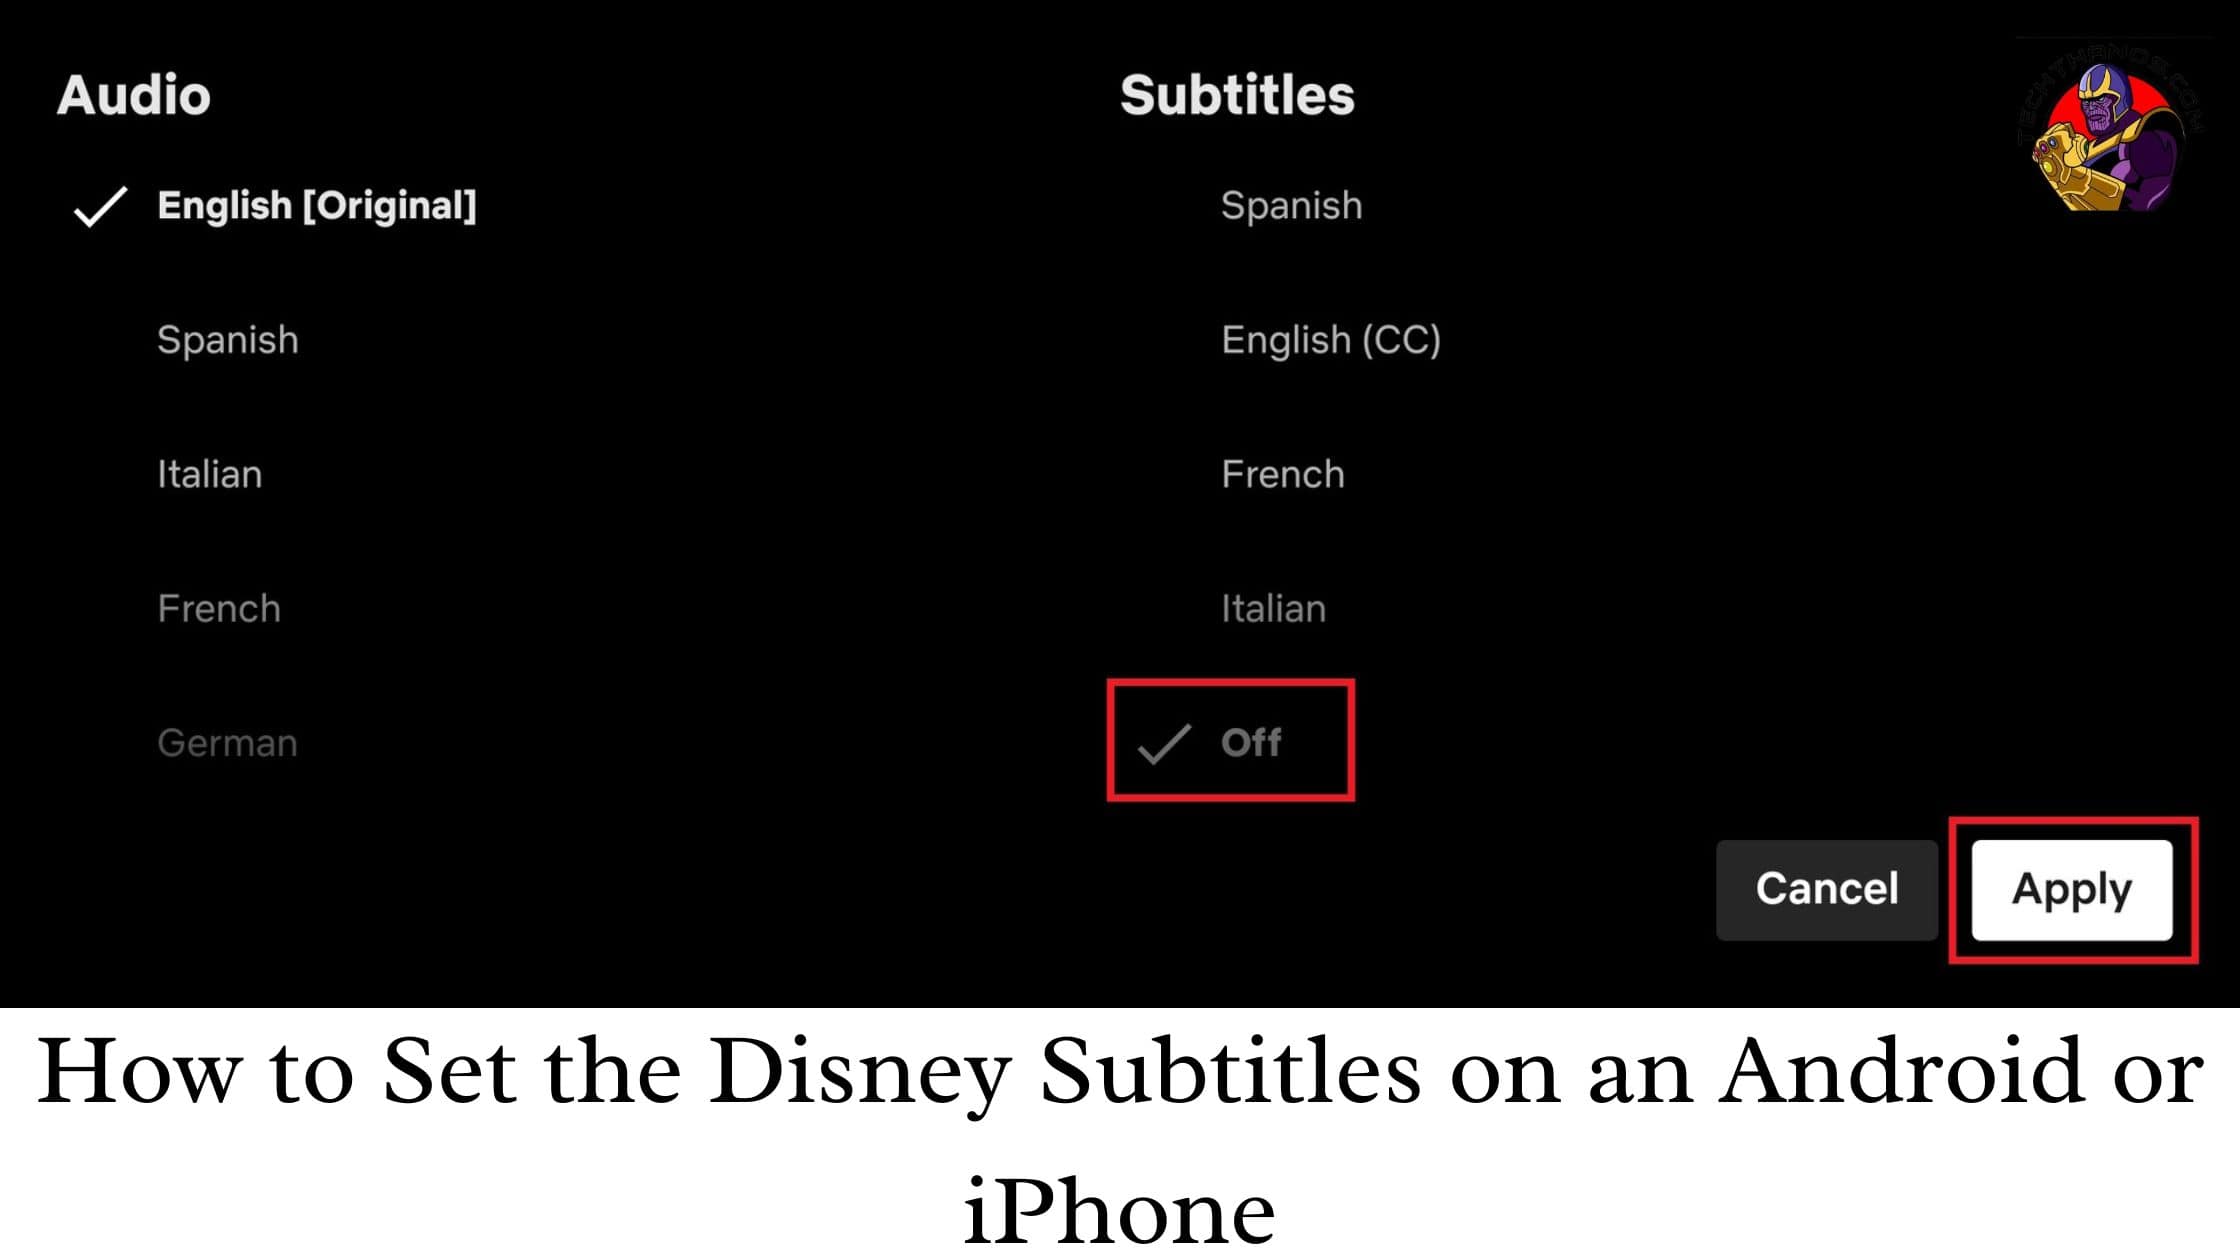 How to Set the Disney Subtitles on an Android or iPhone